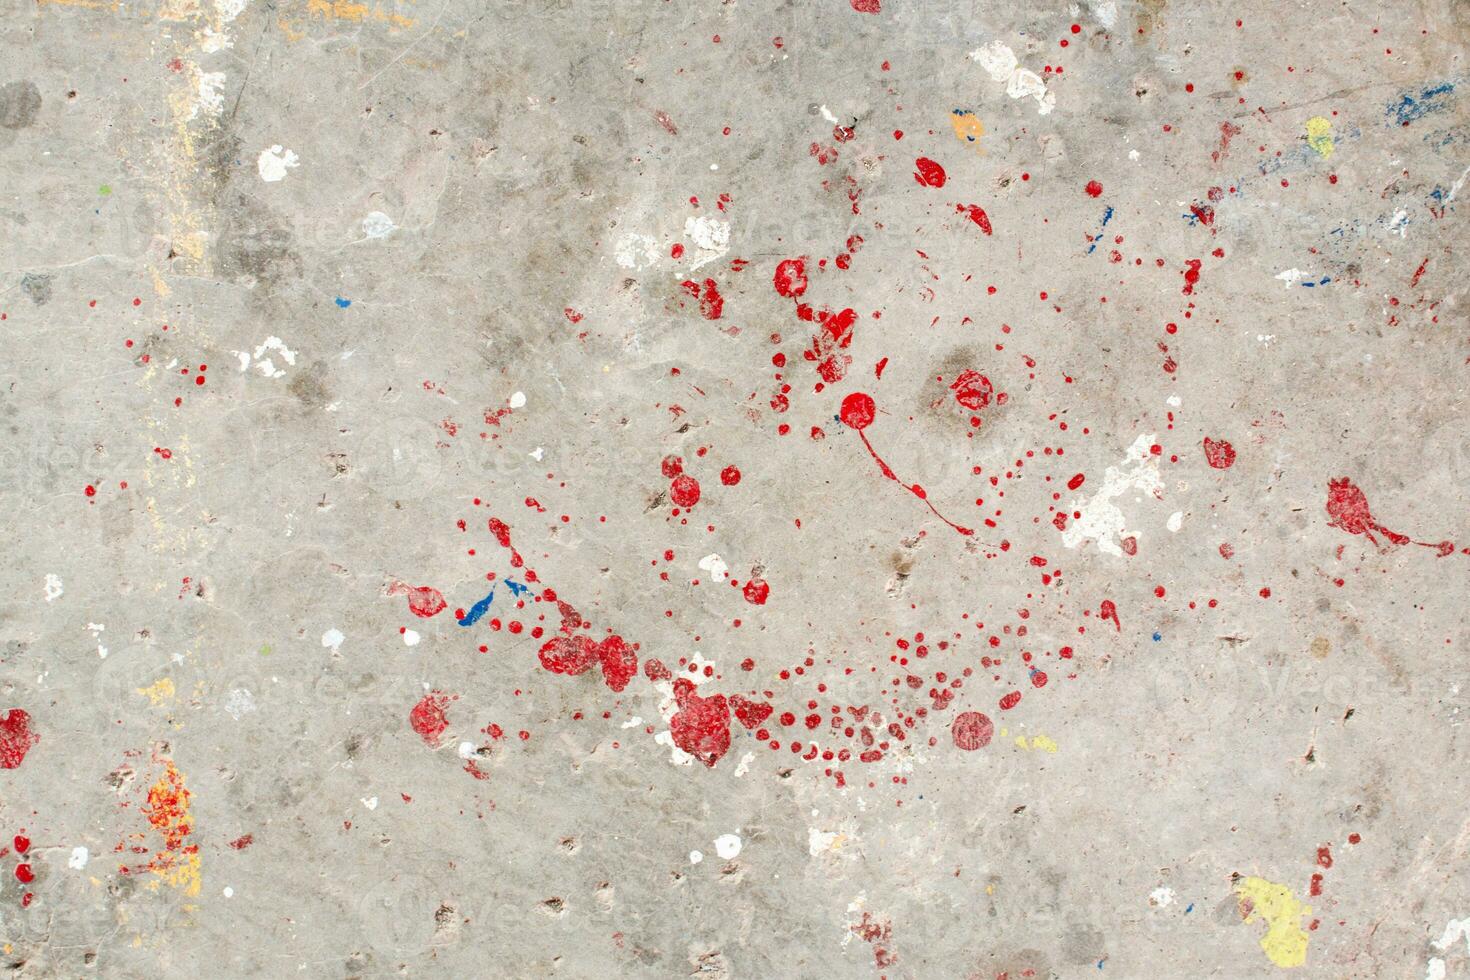 The floor is stained with several drops of various colors. Dripping paint on the concrete floor beautiful art. Droplets of red, black, and white stains on the ground. Multiple oil paint on background. photo